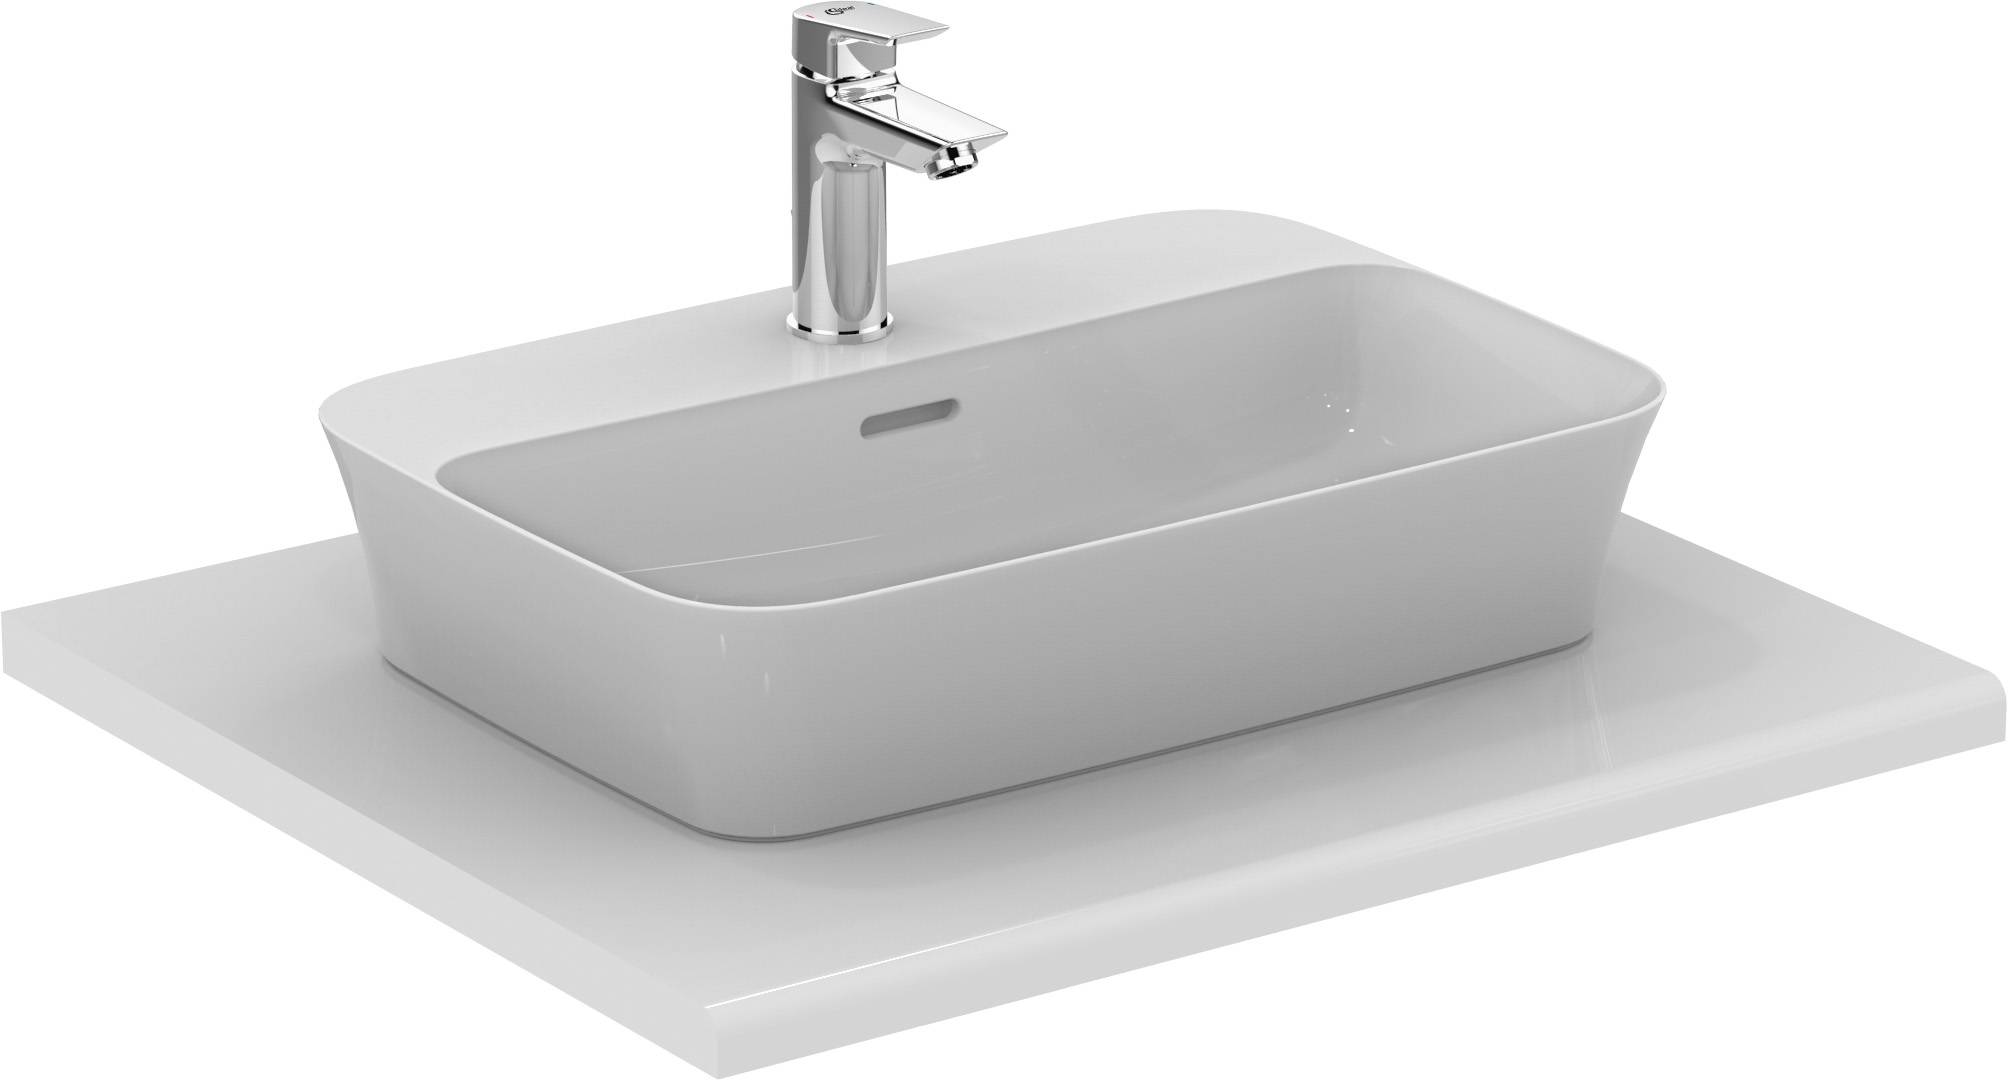 Ipalyss Vessel Rectangular 55X38 Cm With Tapdeck And Slotted Overflow